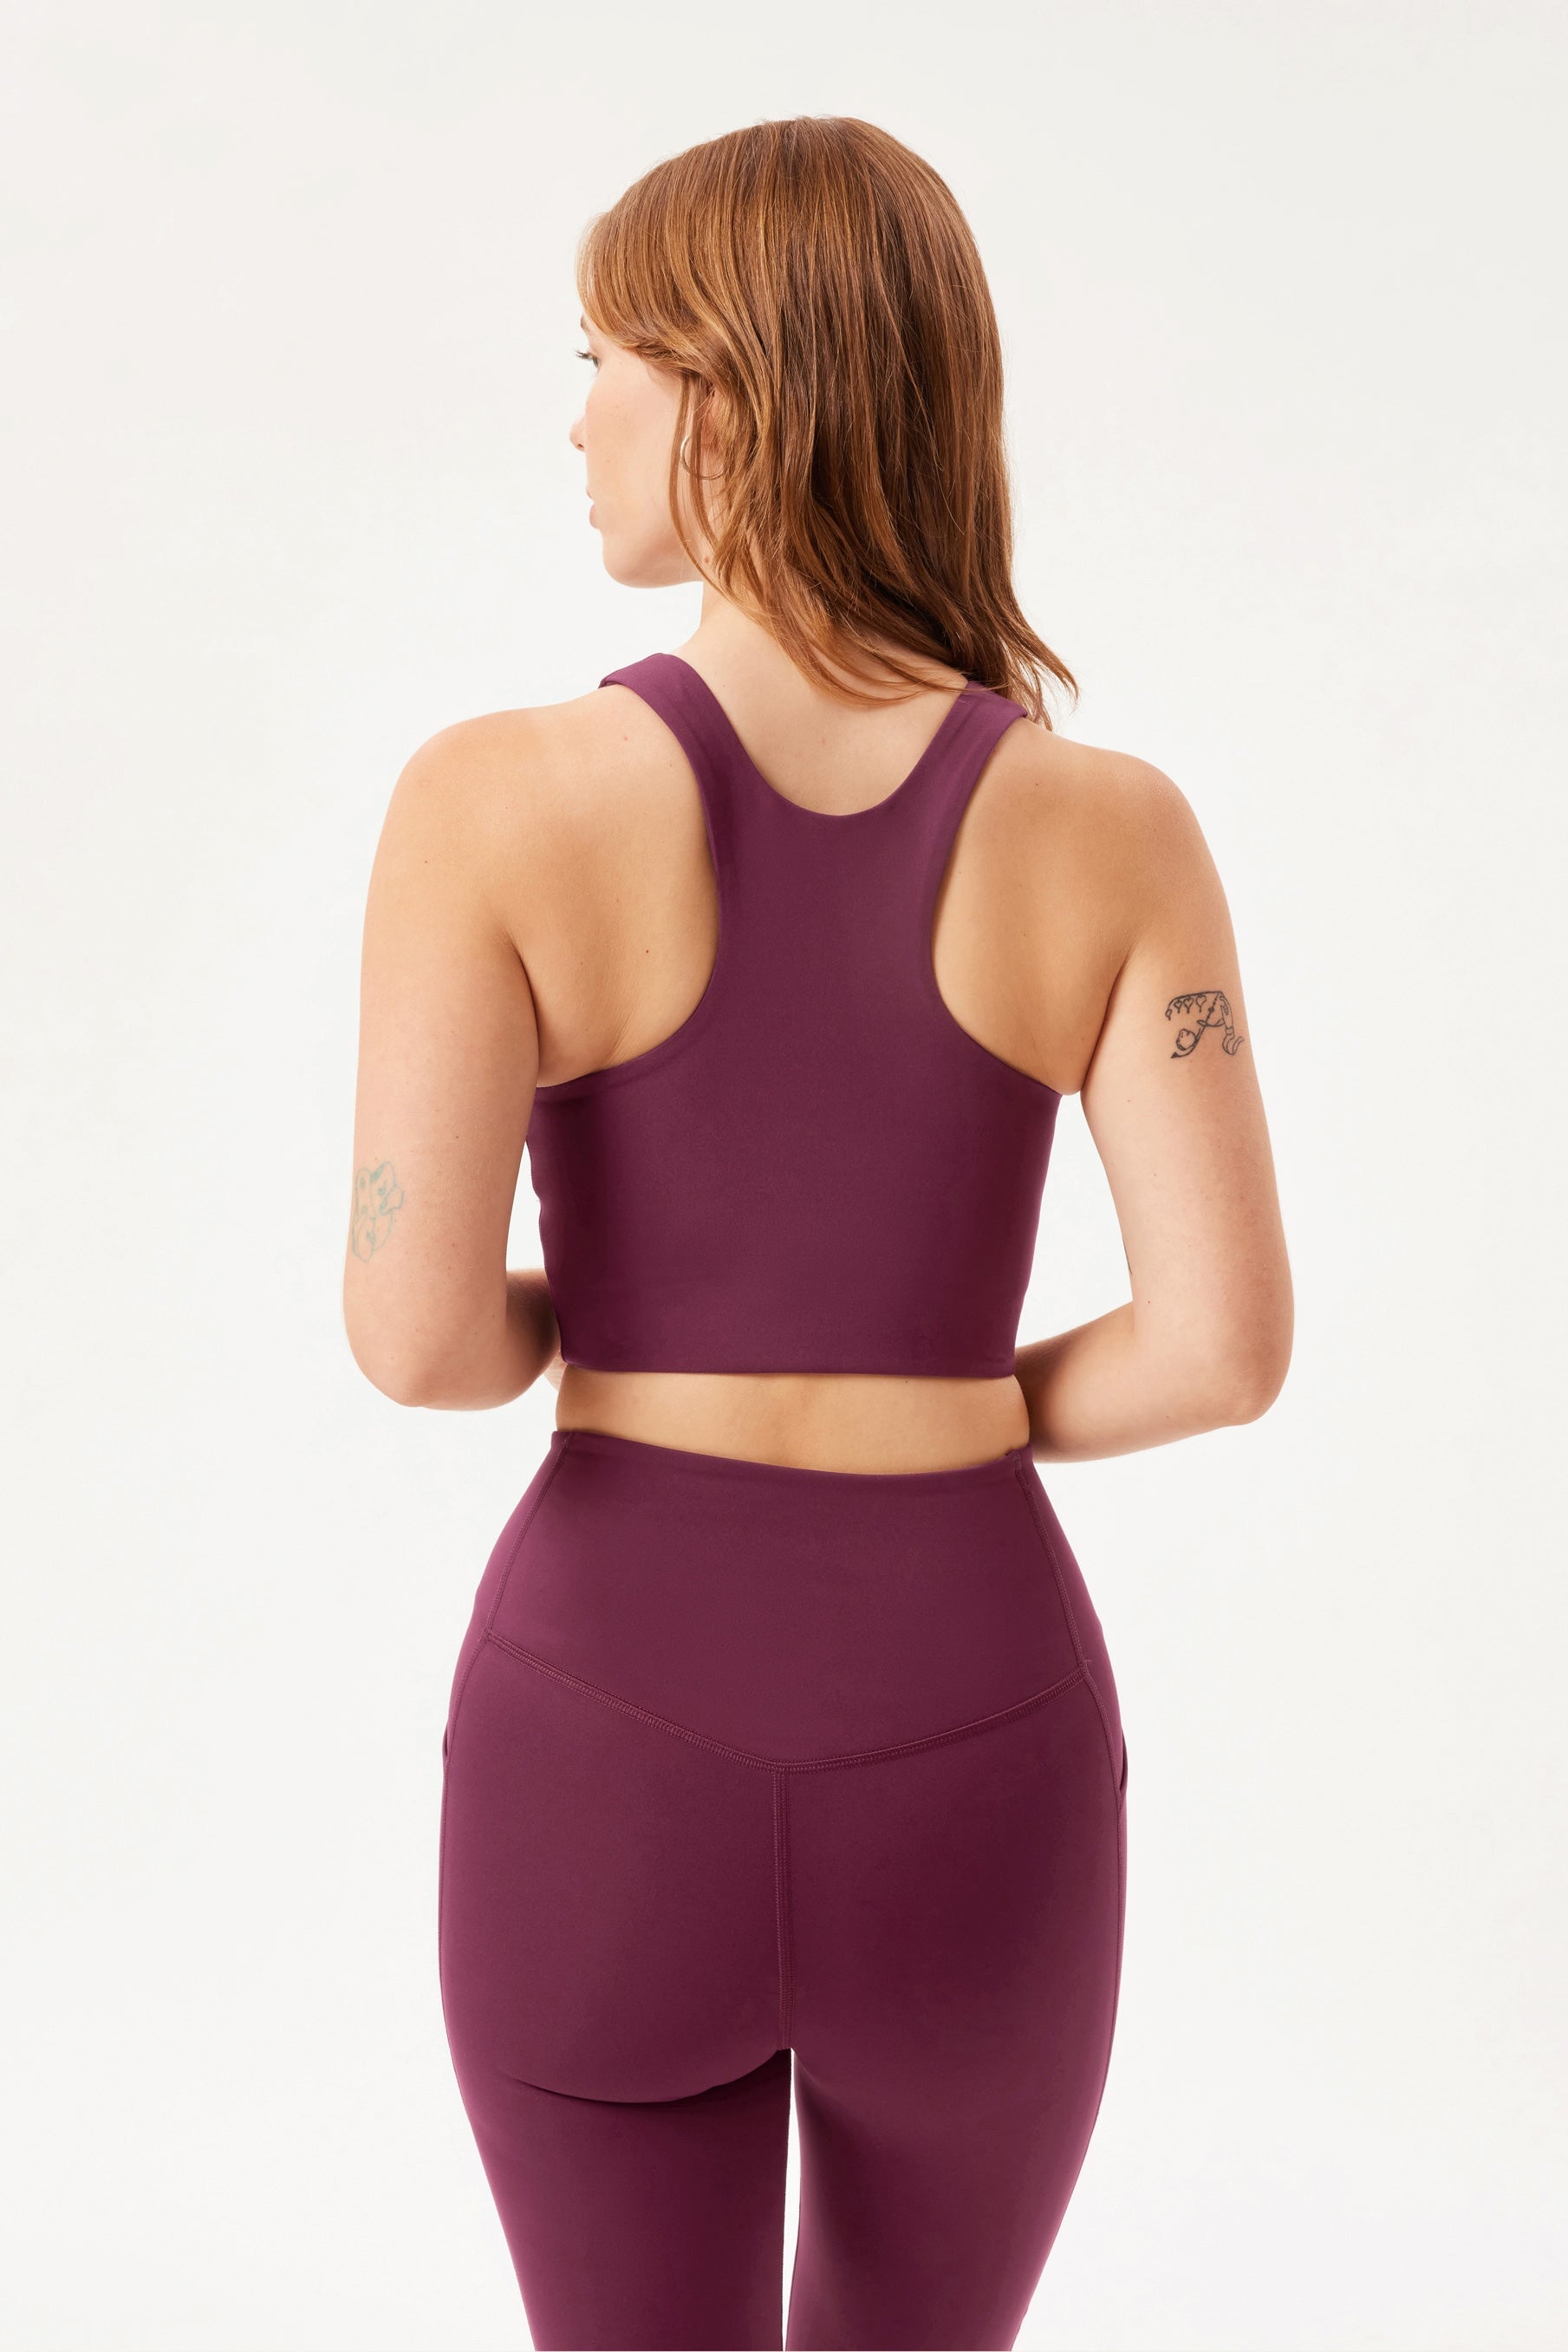 GIRLFRIEND COLLECTIVE + NET SUSTAIN Dylan stretch recycled sports